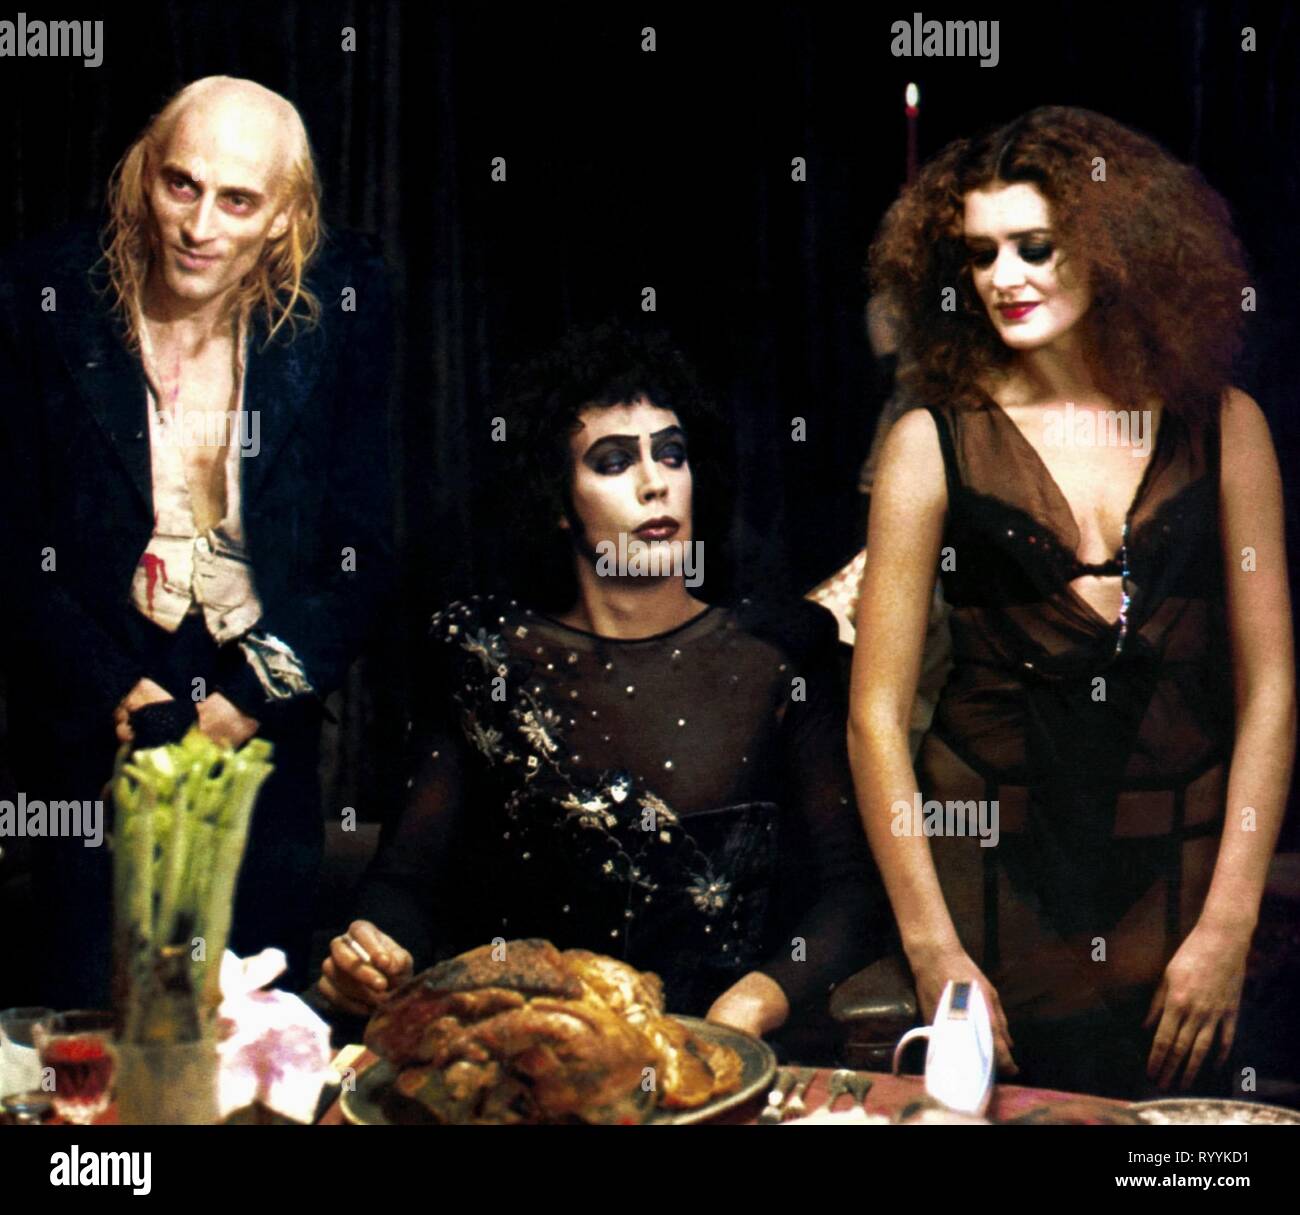 RICHARD O'BRIEN, TIM CURRY, PATRICIA QUINN, THE ROCKY HORROR PICTURE SHOW, 1975 Stock Photo